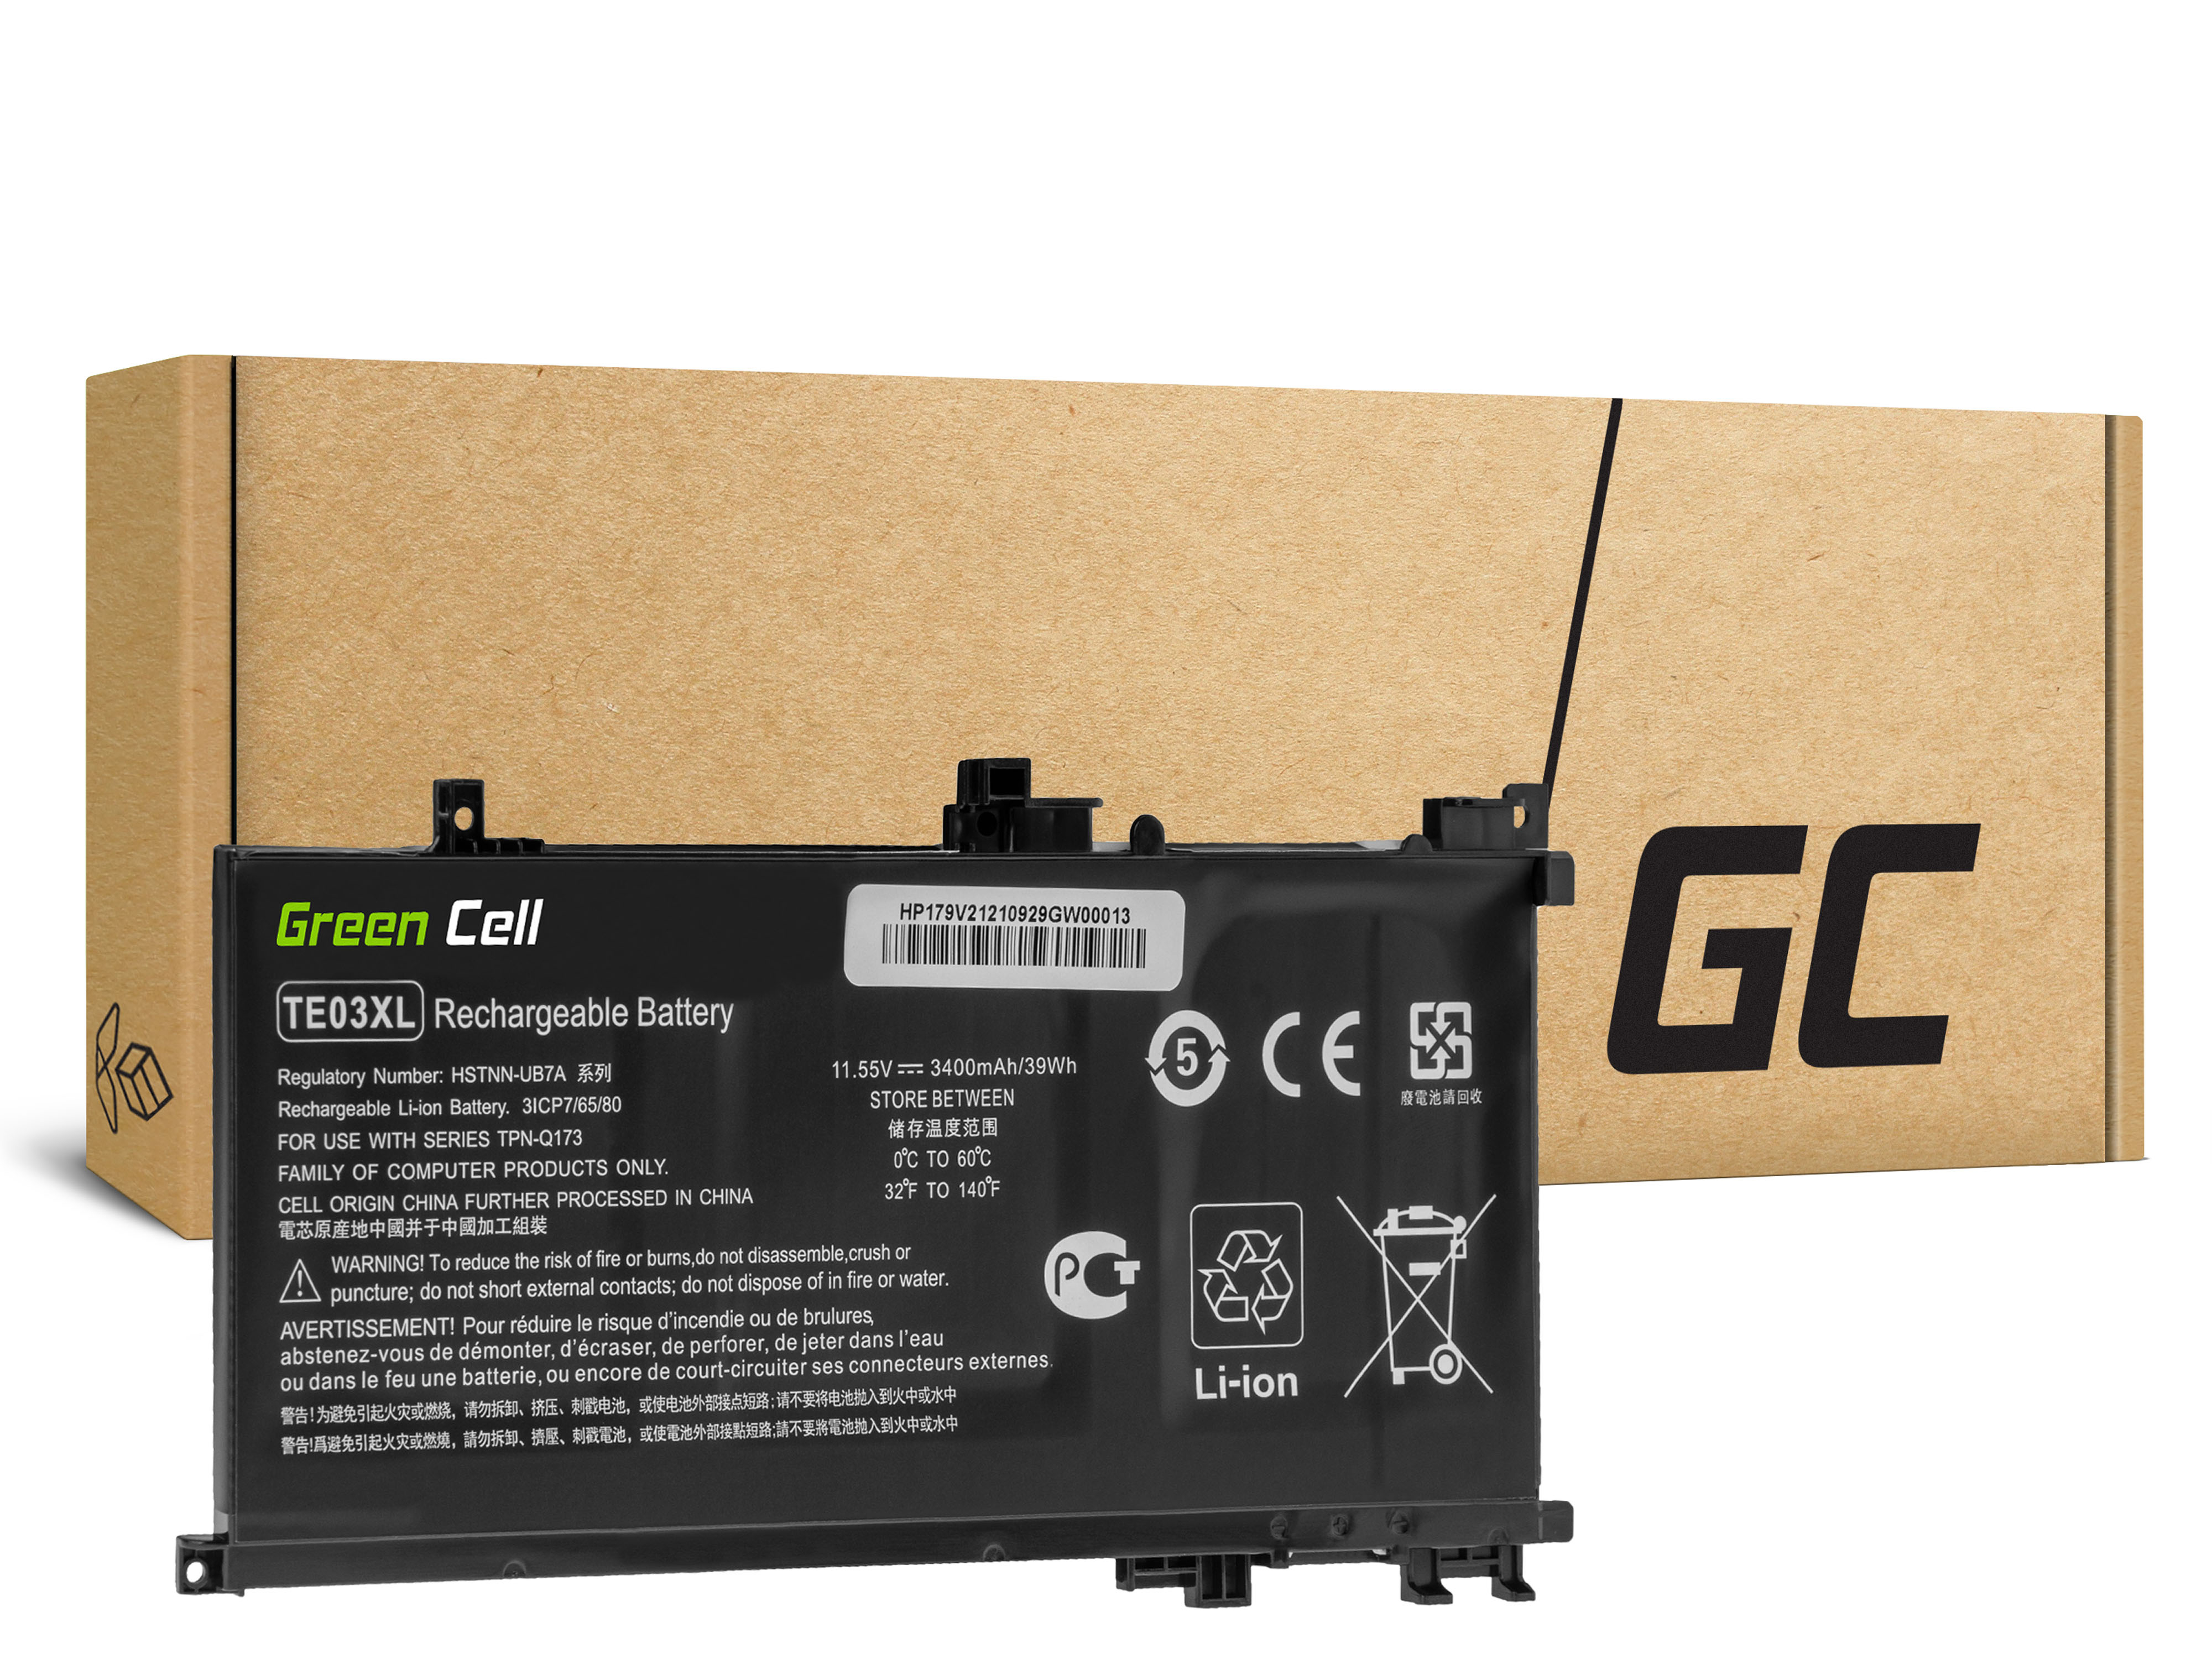 GREEN CELL Laptop Battery TE03XL for HP Omen 15-AX HP Pavilion 15-BC402NW - 11.55V - 33Wh